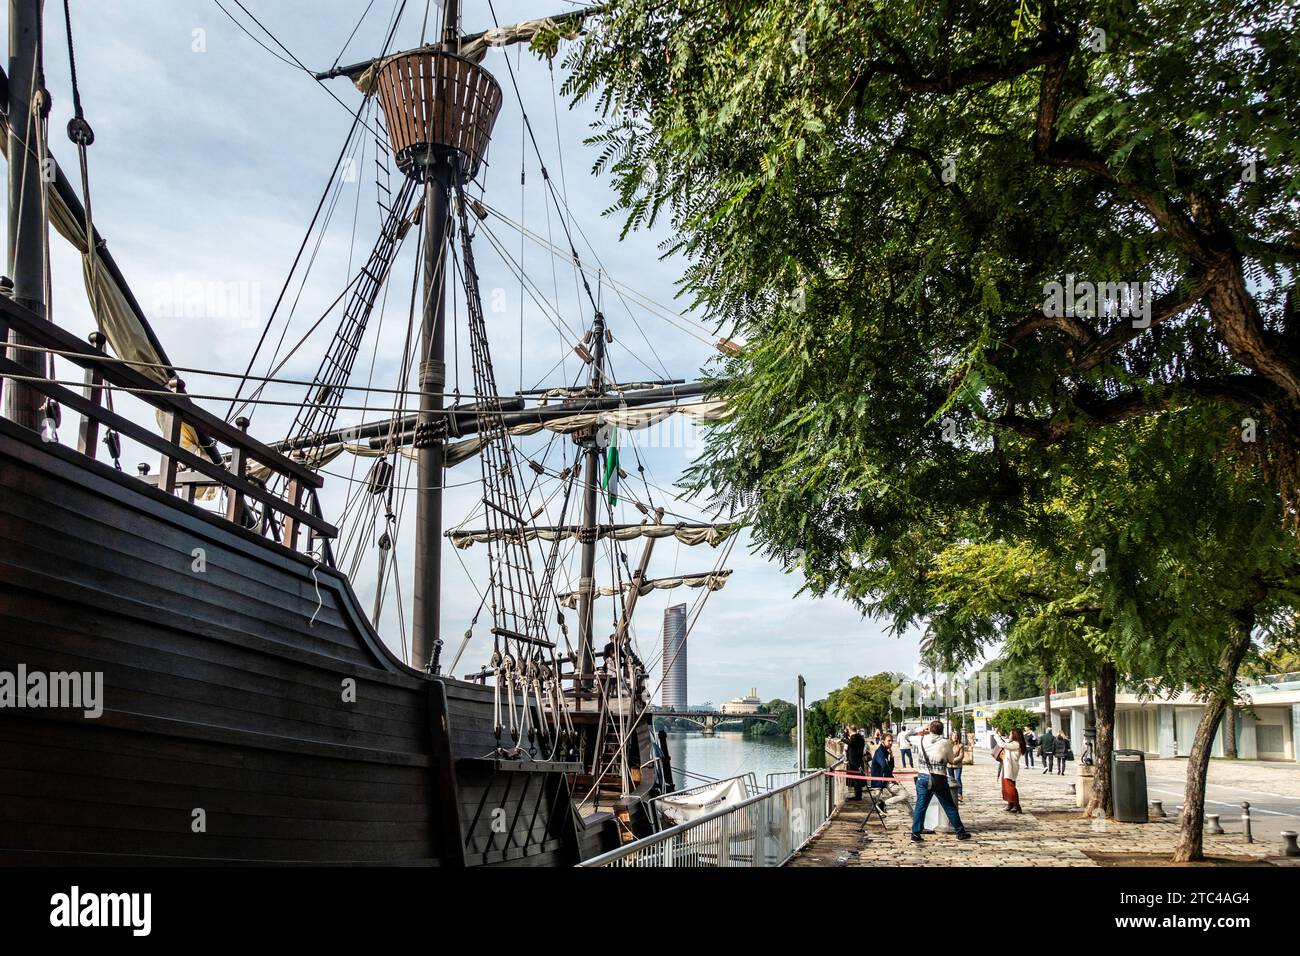 A detailed replica of a historic sailing ship moored along the serene Guadalquivir River, inviting exploration into Spain's maritime past. Stock Photo